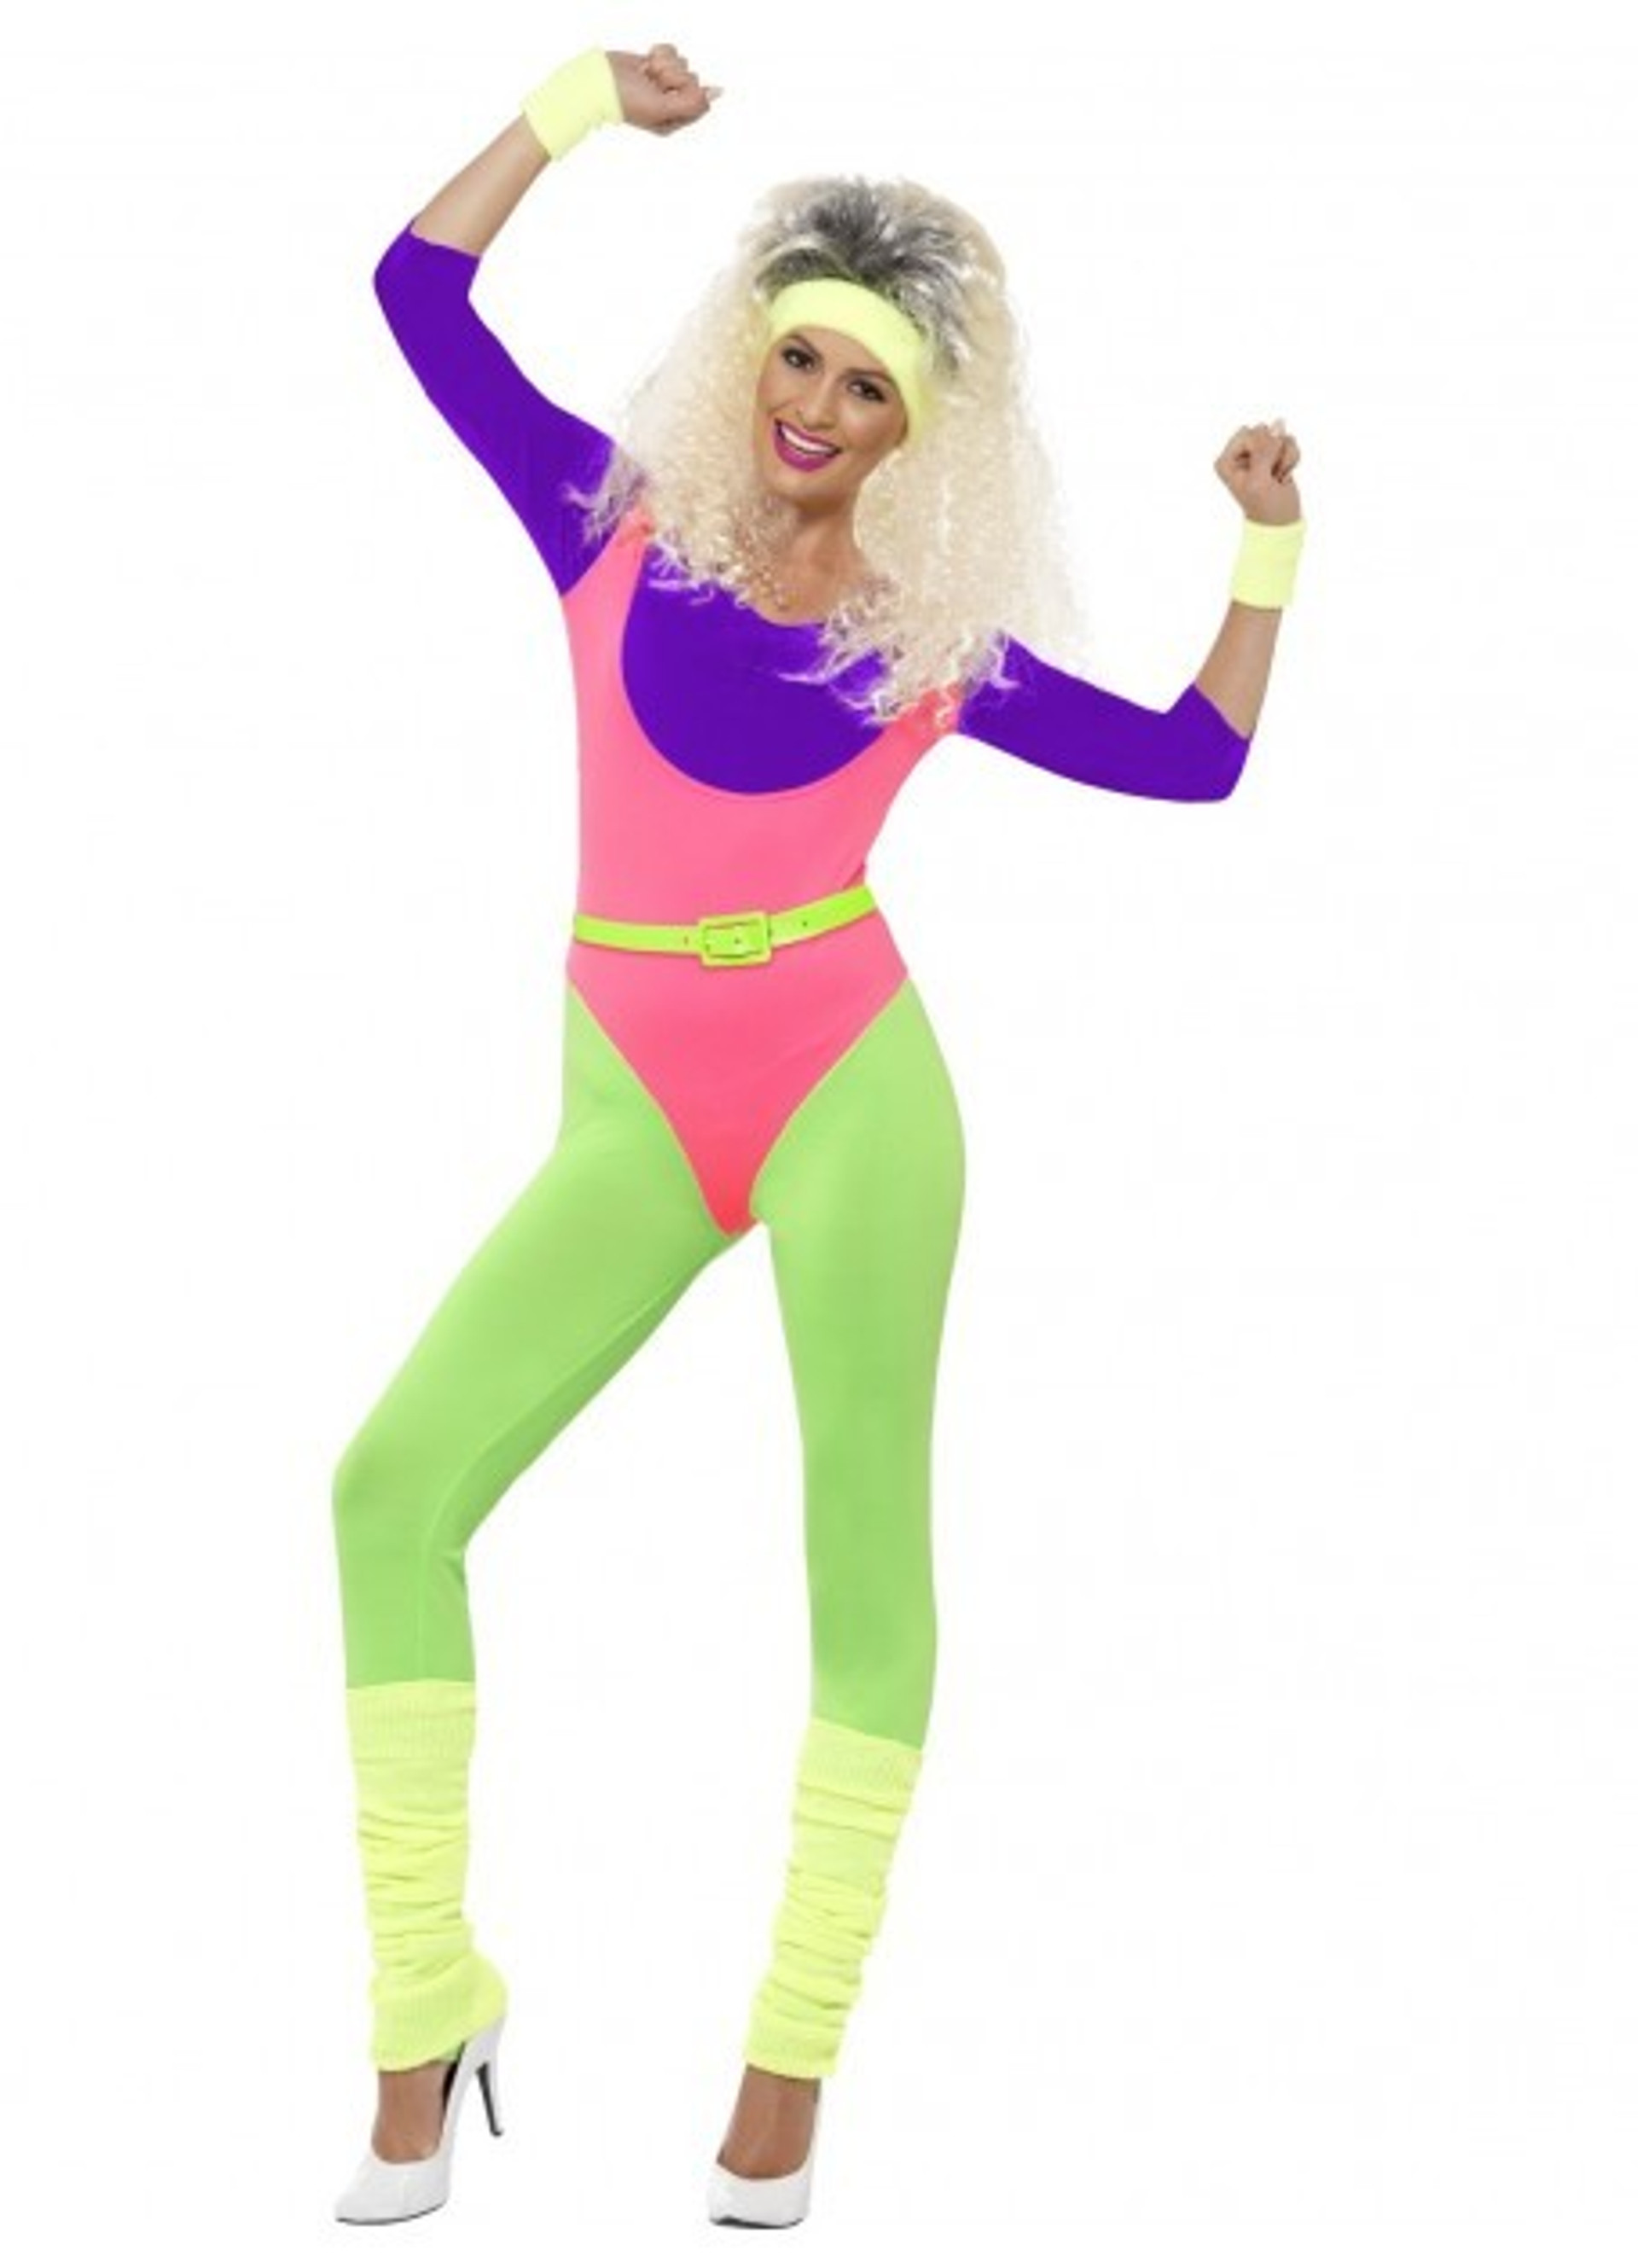 1980s Workout Costume ideal for 1980s Themed Parties.